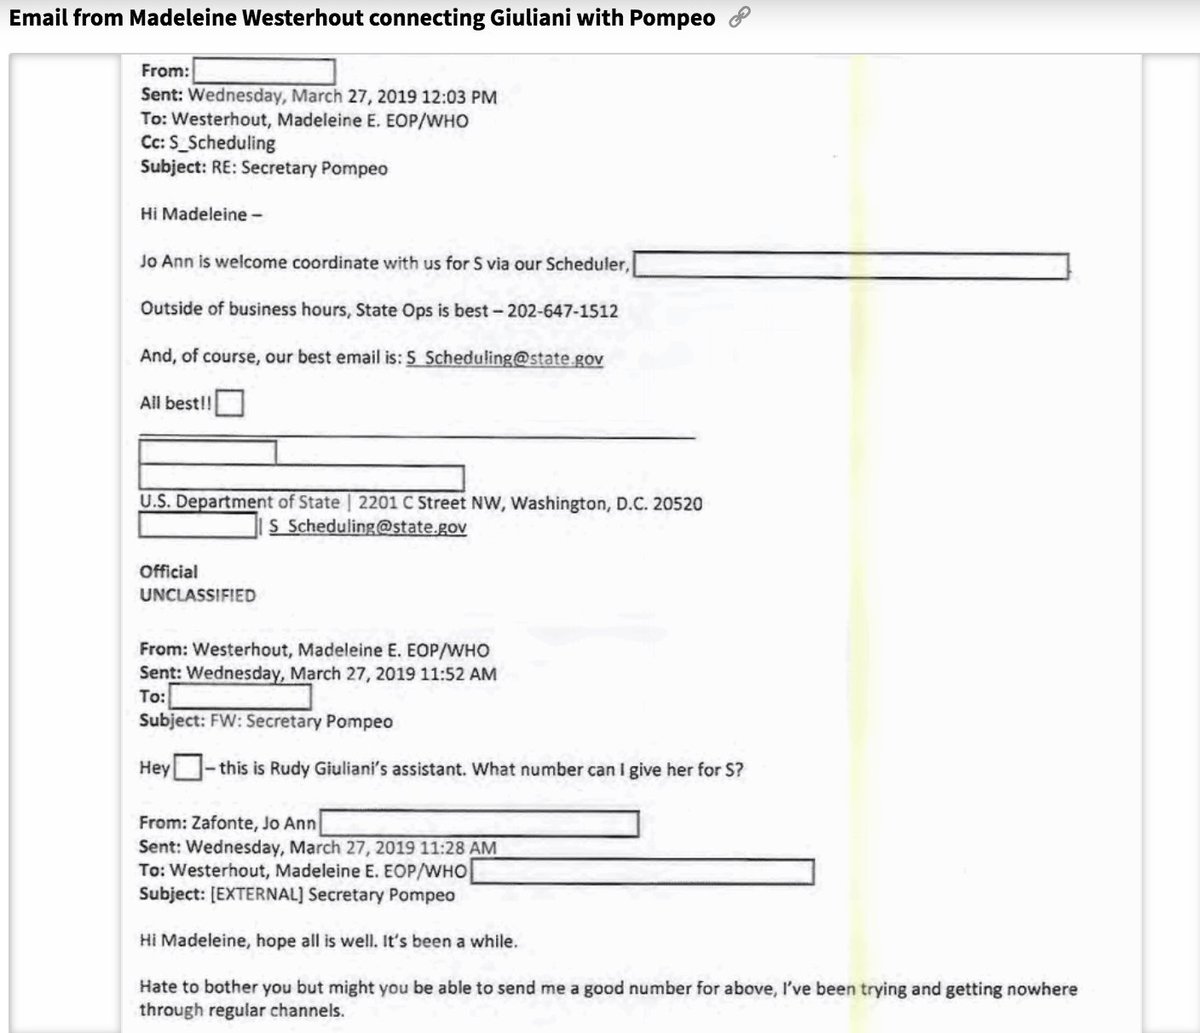 The records also show that Trump’s assistant in the Oval Office was the one that connected Giuliani to Pompeo’s office. https://www.documentcloud.org/documents/6557889-State-Department-Records-of-Giuliani-and-Ukraine.html#document/p55/a537063